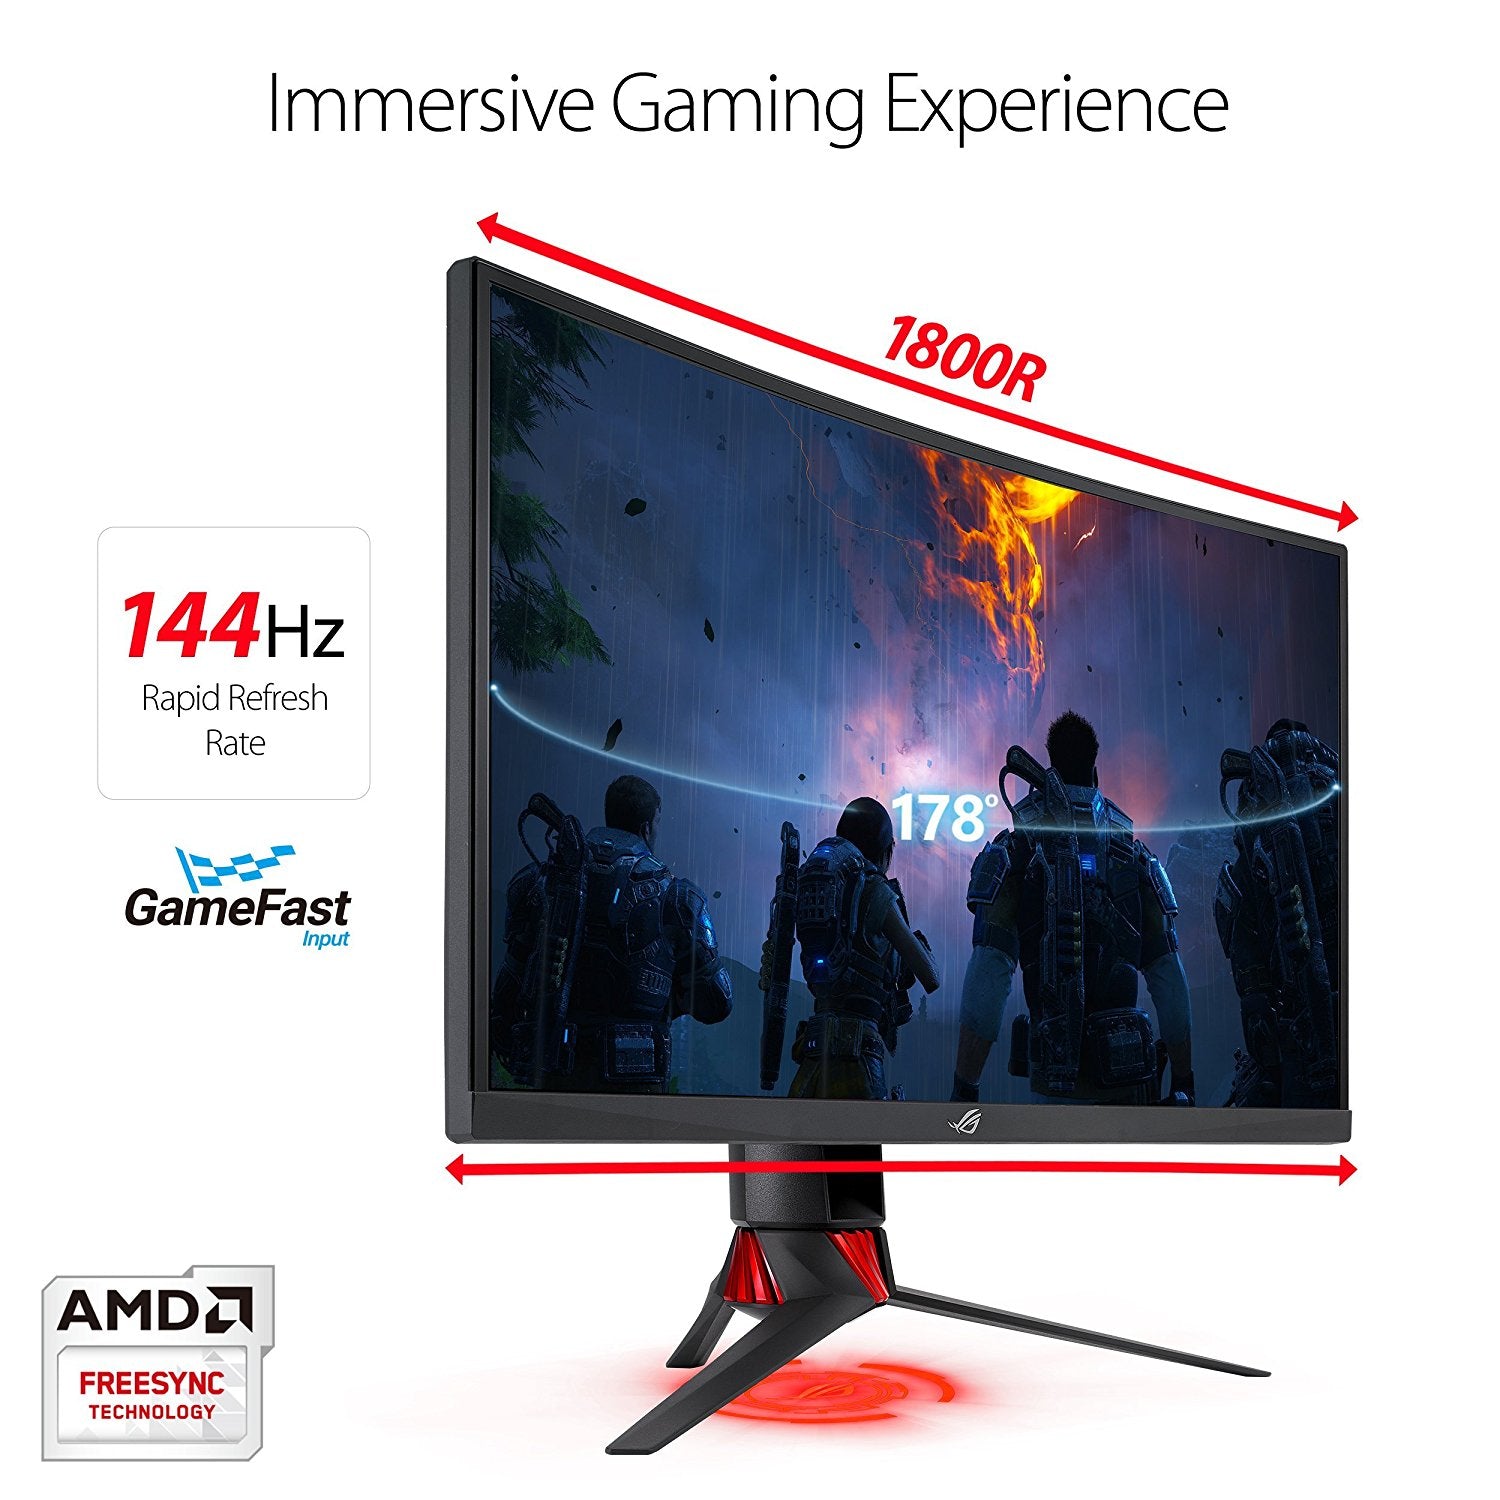 ASUS ROG Strix XG27VQ Curved Gaming Monitor – 27" Full HD - The Peripheral Store | TPS